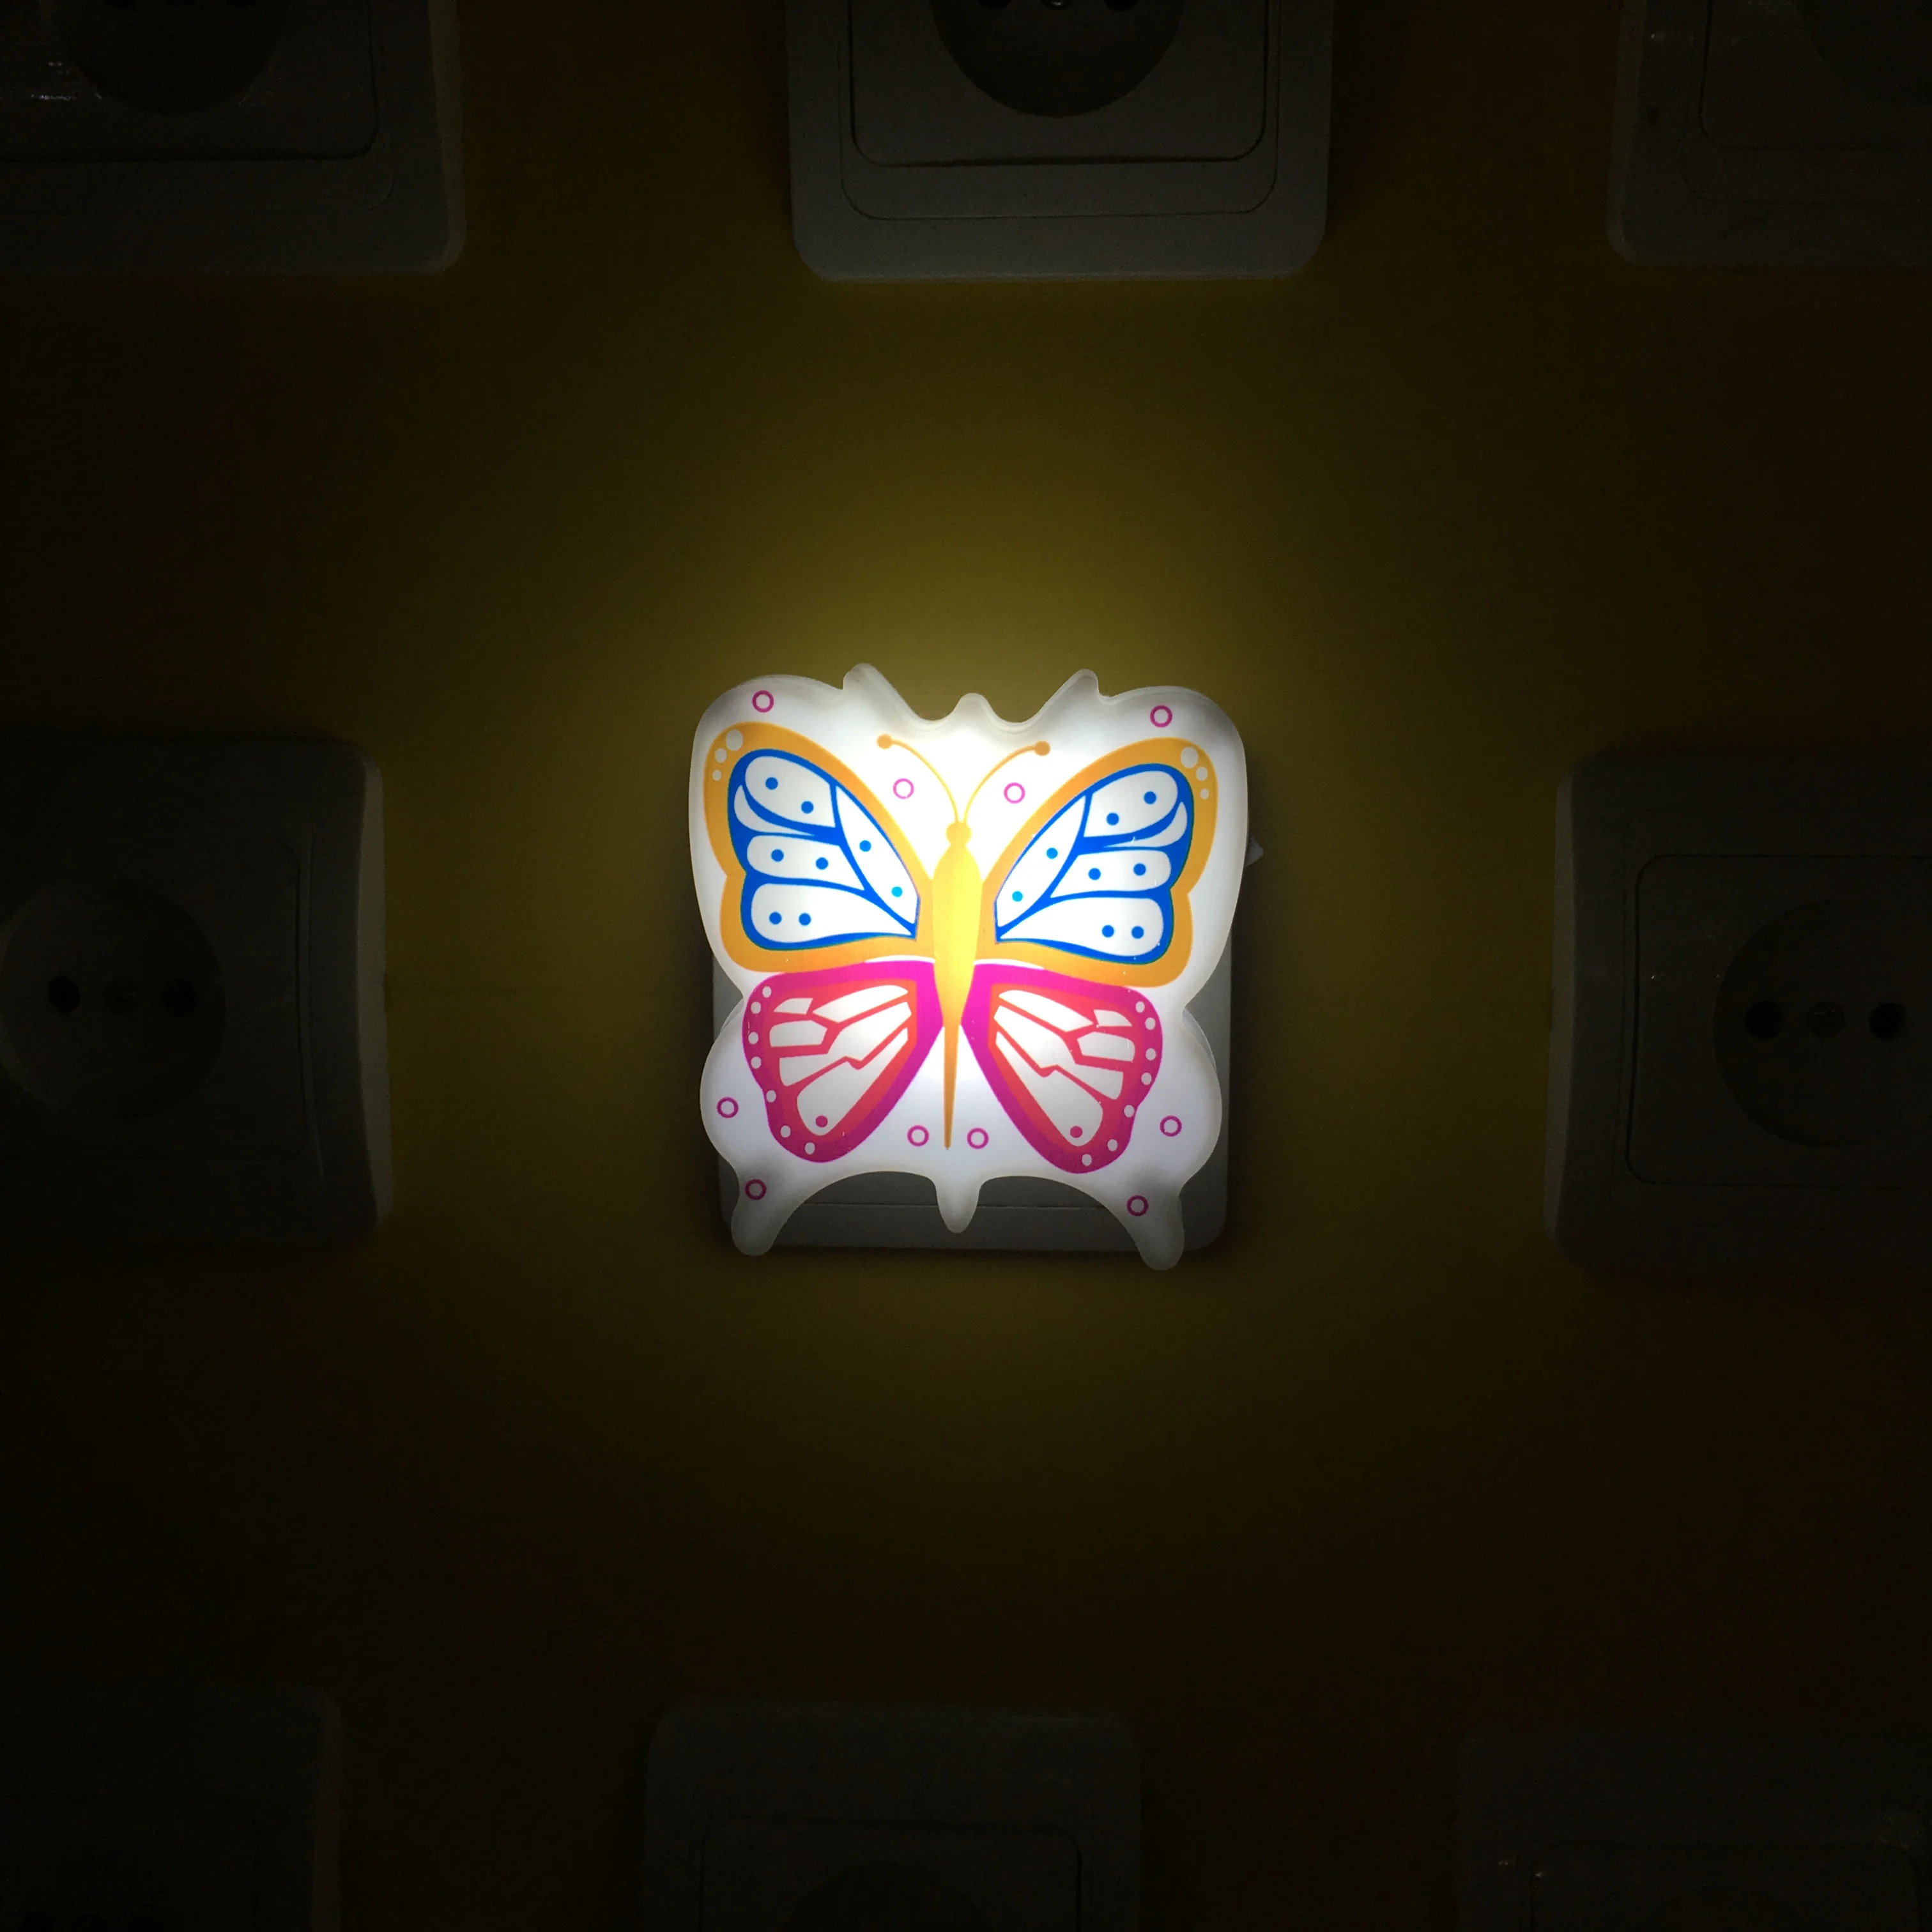 OEM W058 butterfly shape 4 SMD mini switch plug in night light with 0.6W 3SMD AC 110V or 220V